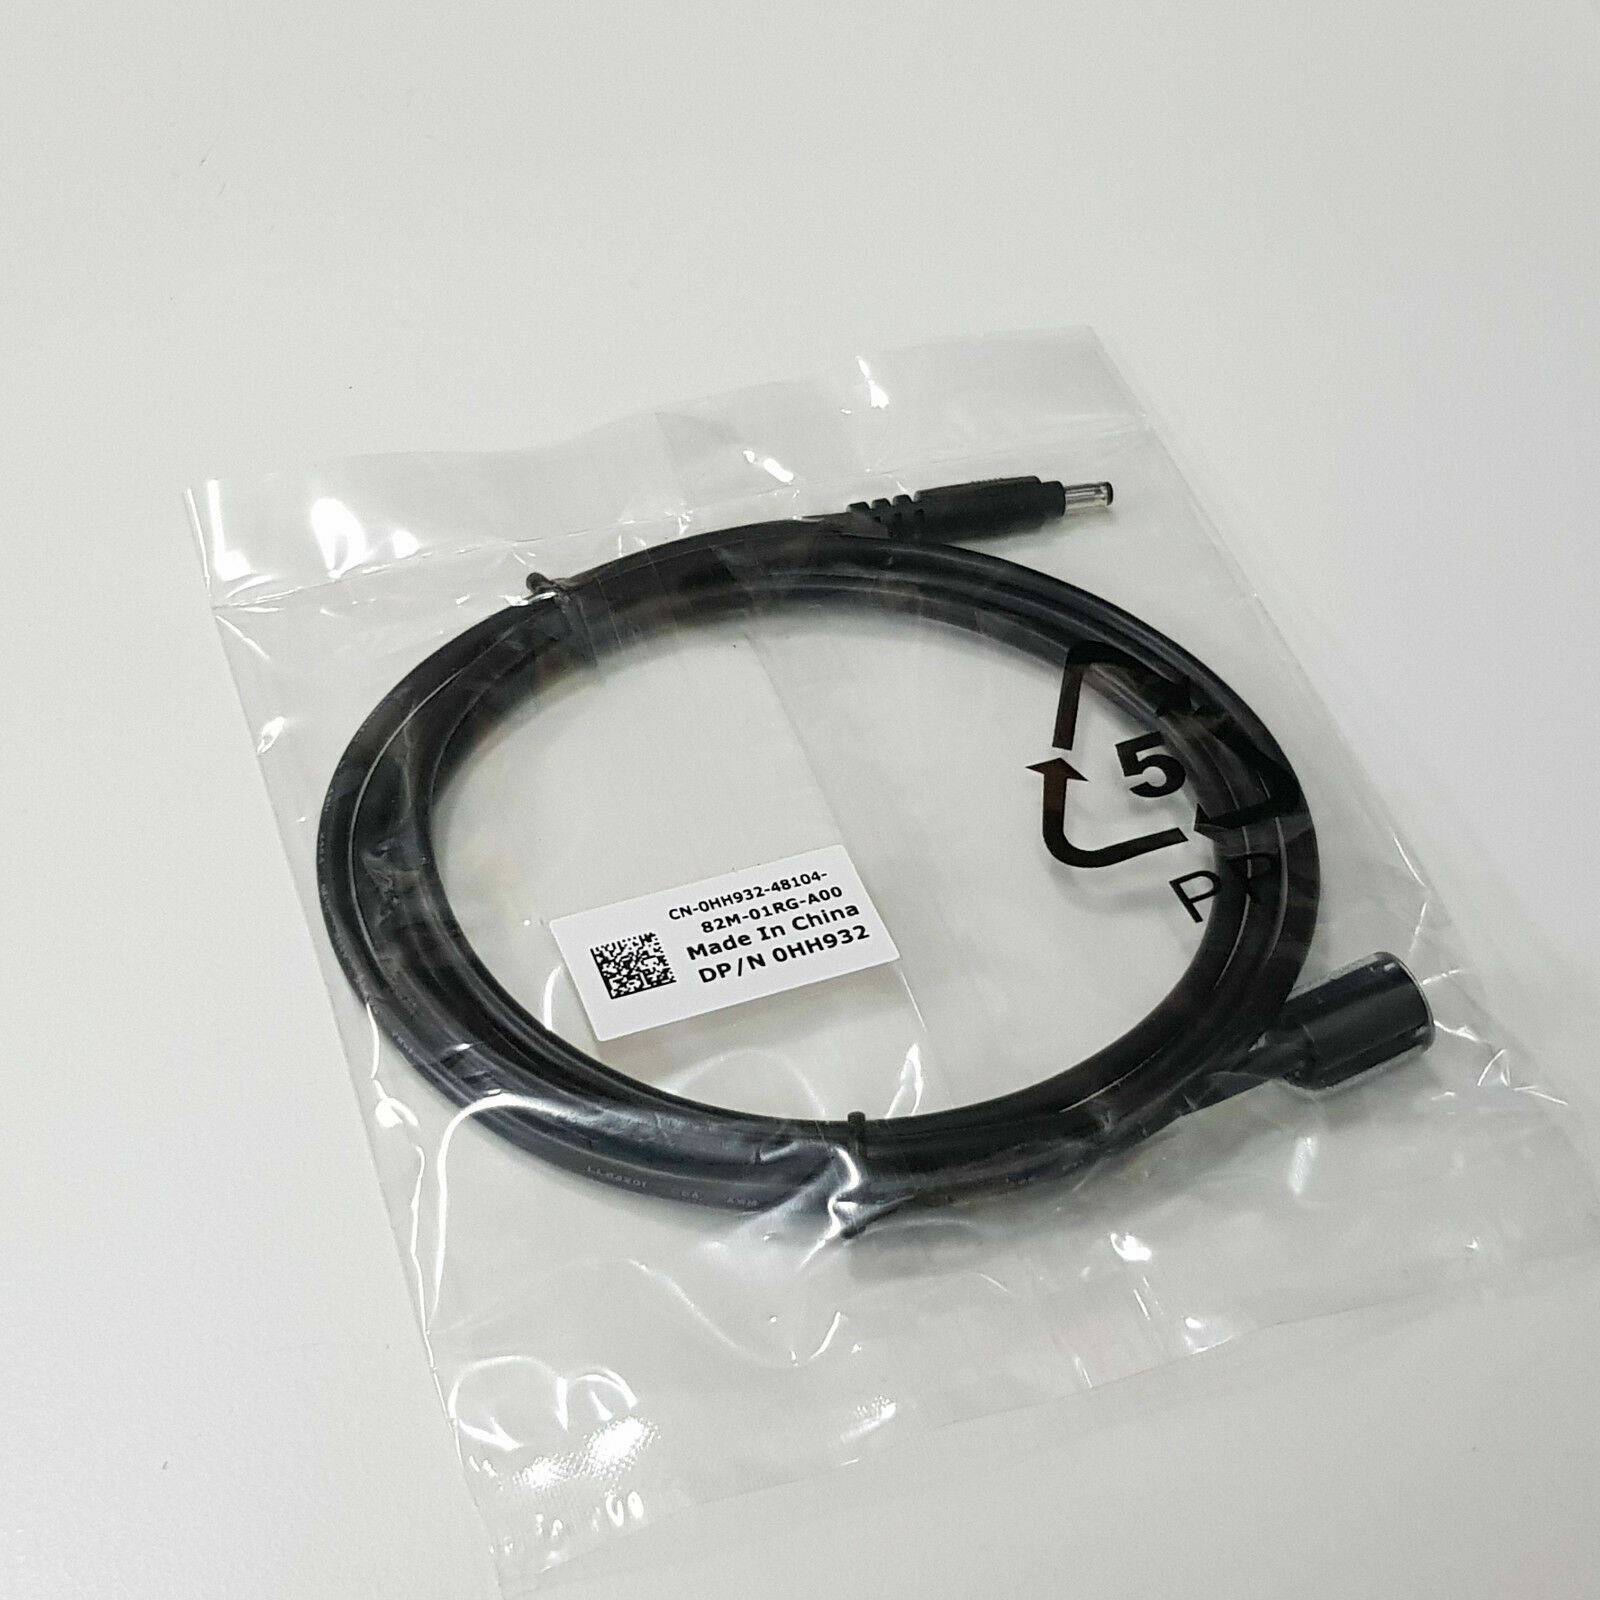 Genuine Dell PowerEdge LED Status Indicator Light Cable HH932 0HH932 